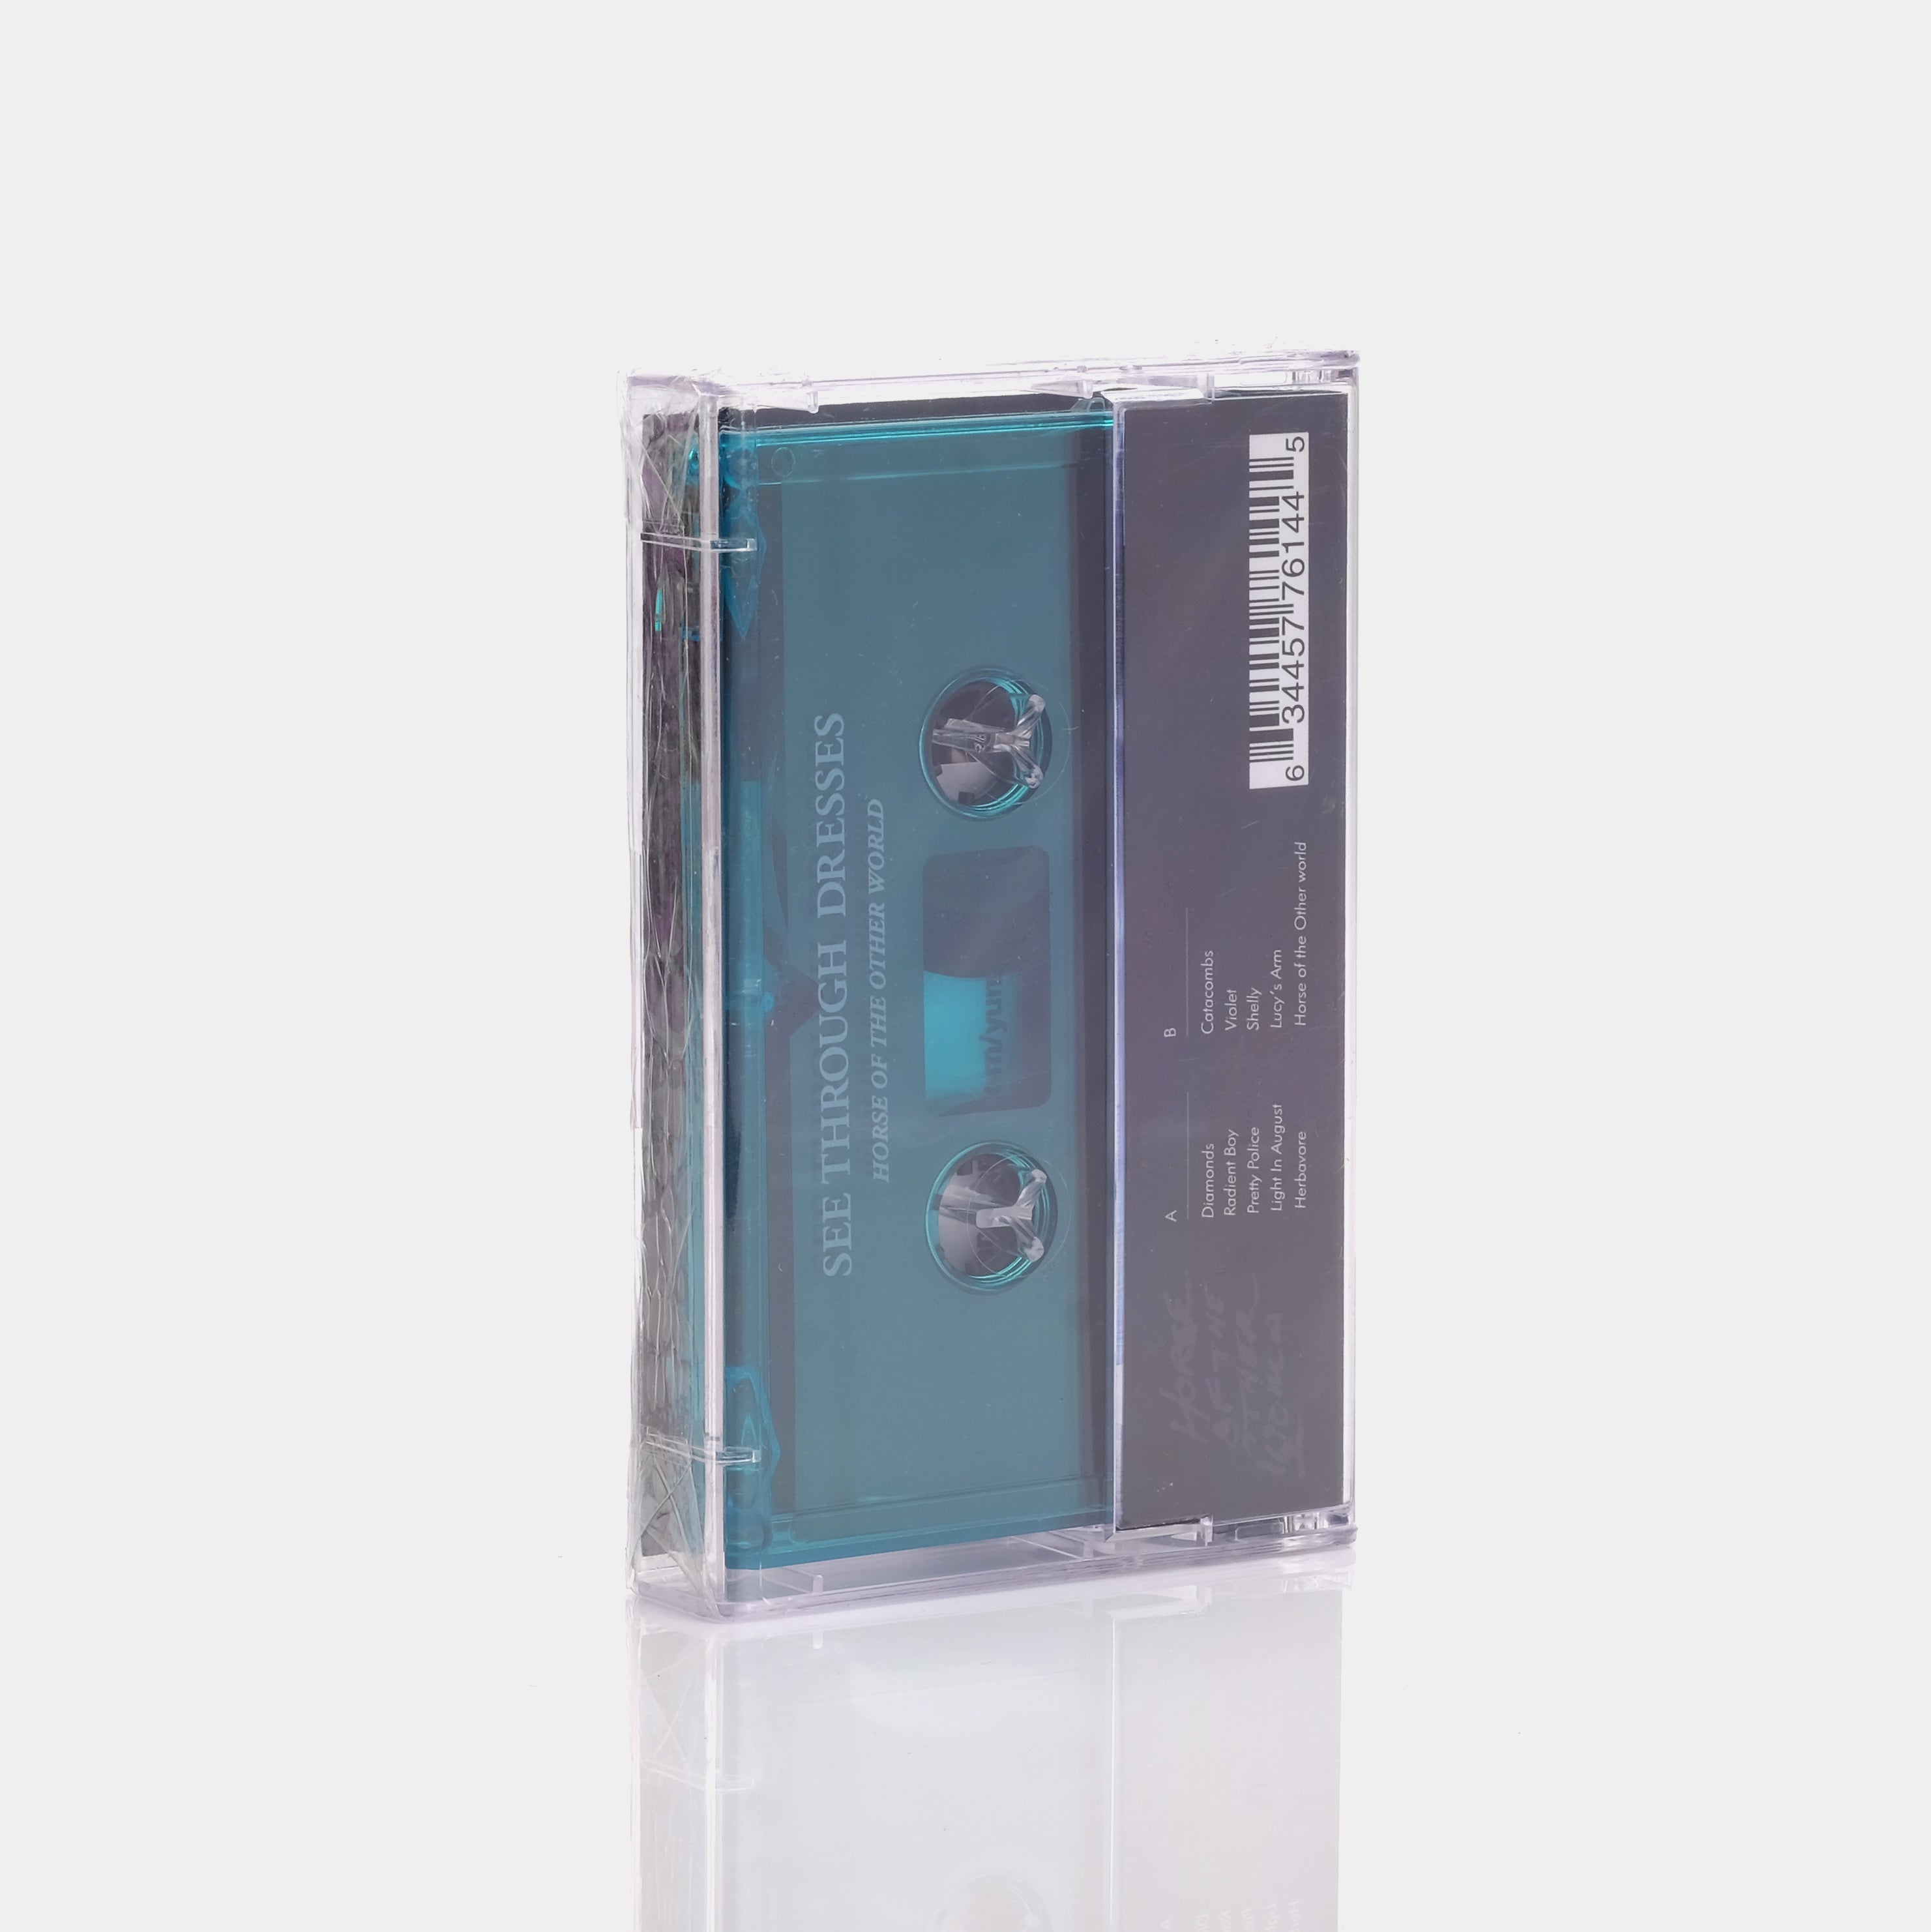 See Through Dresses - Horse of the Other World Cassette Tape